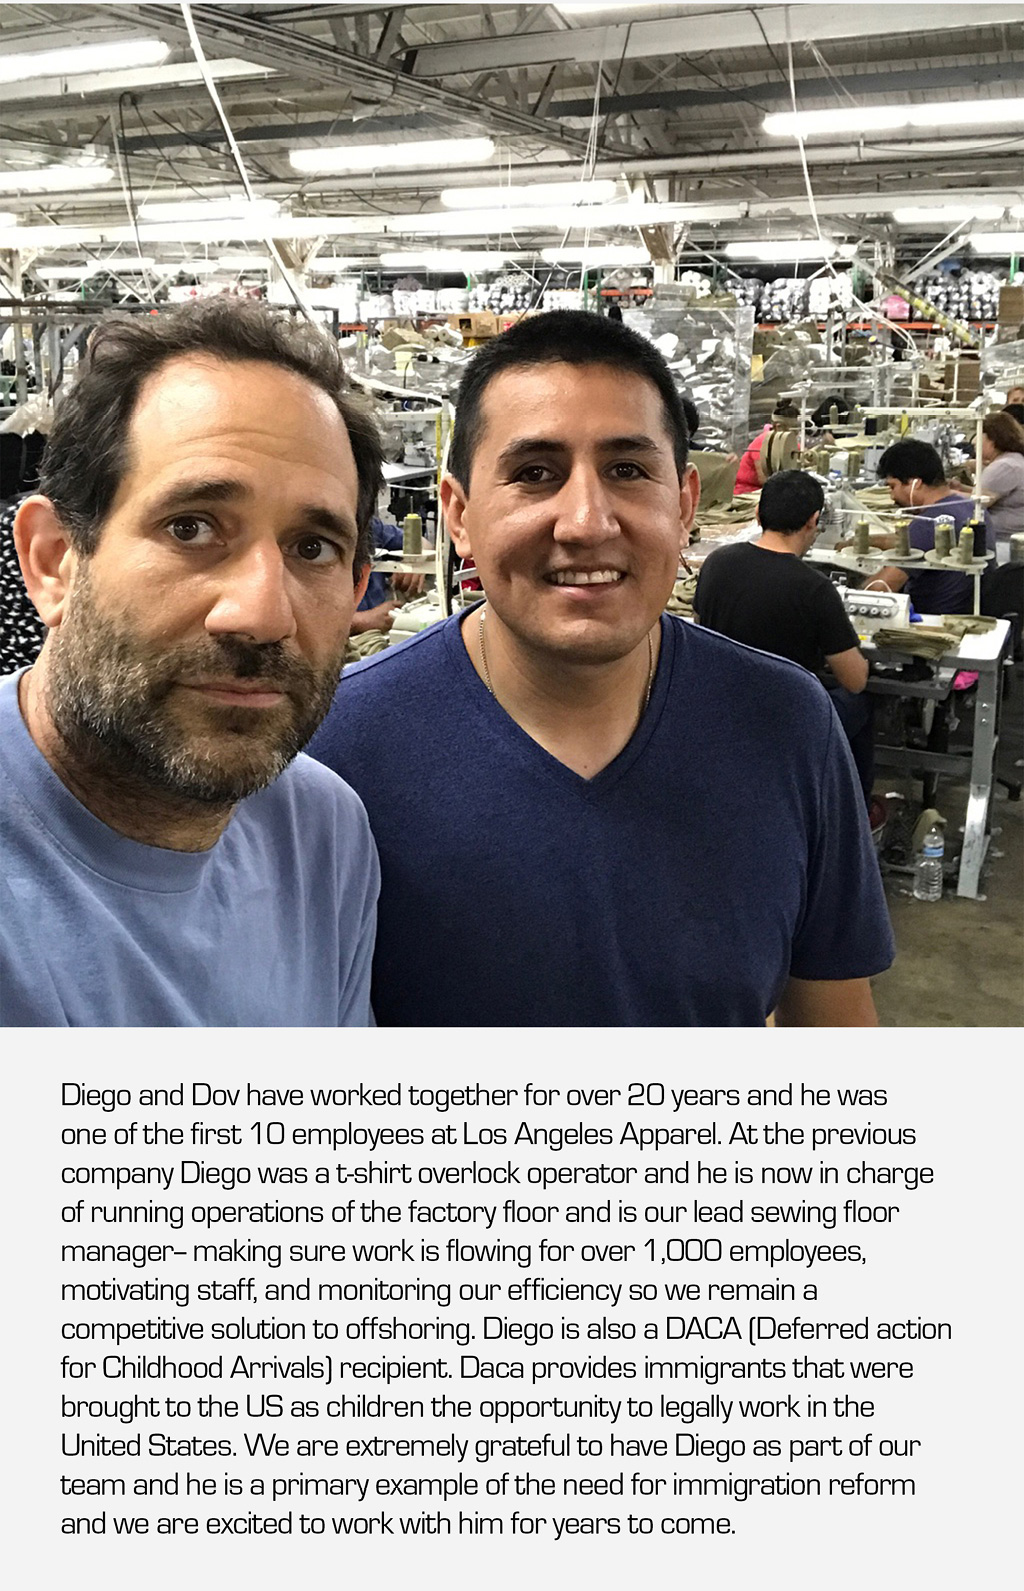 Diego and Dov